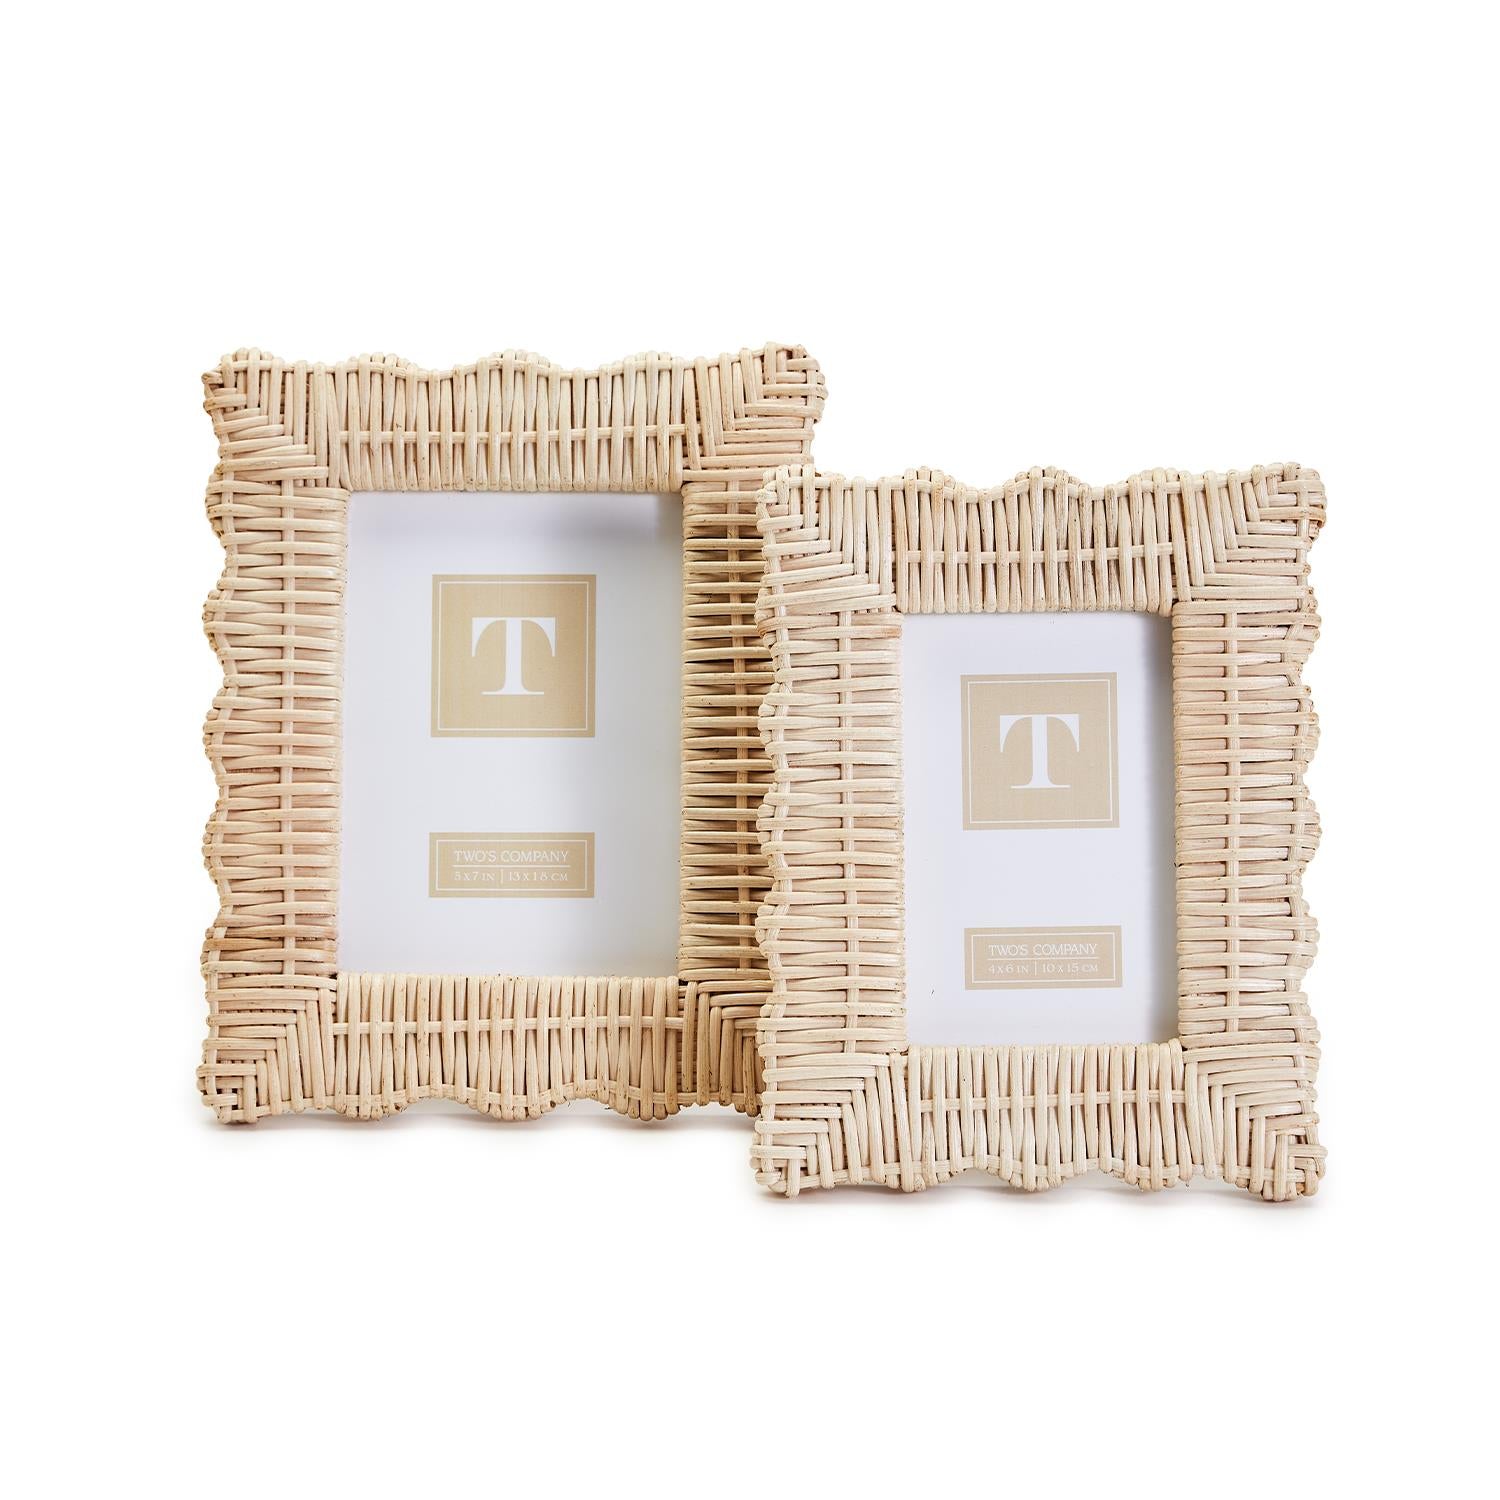 Wicker Weave Frame - 4x6 Home Decor Two's Company   